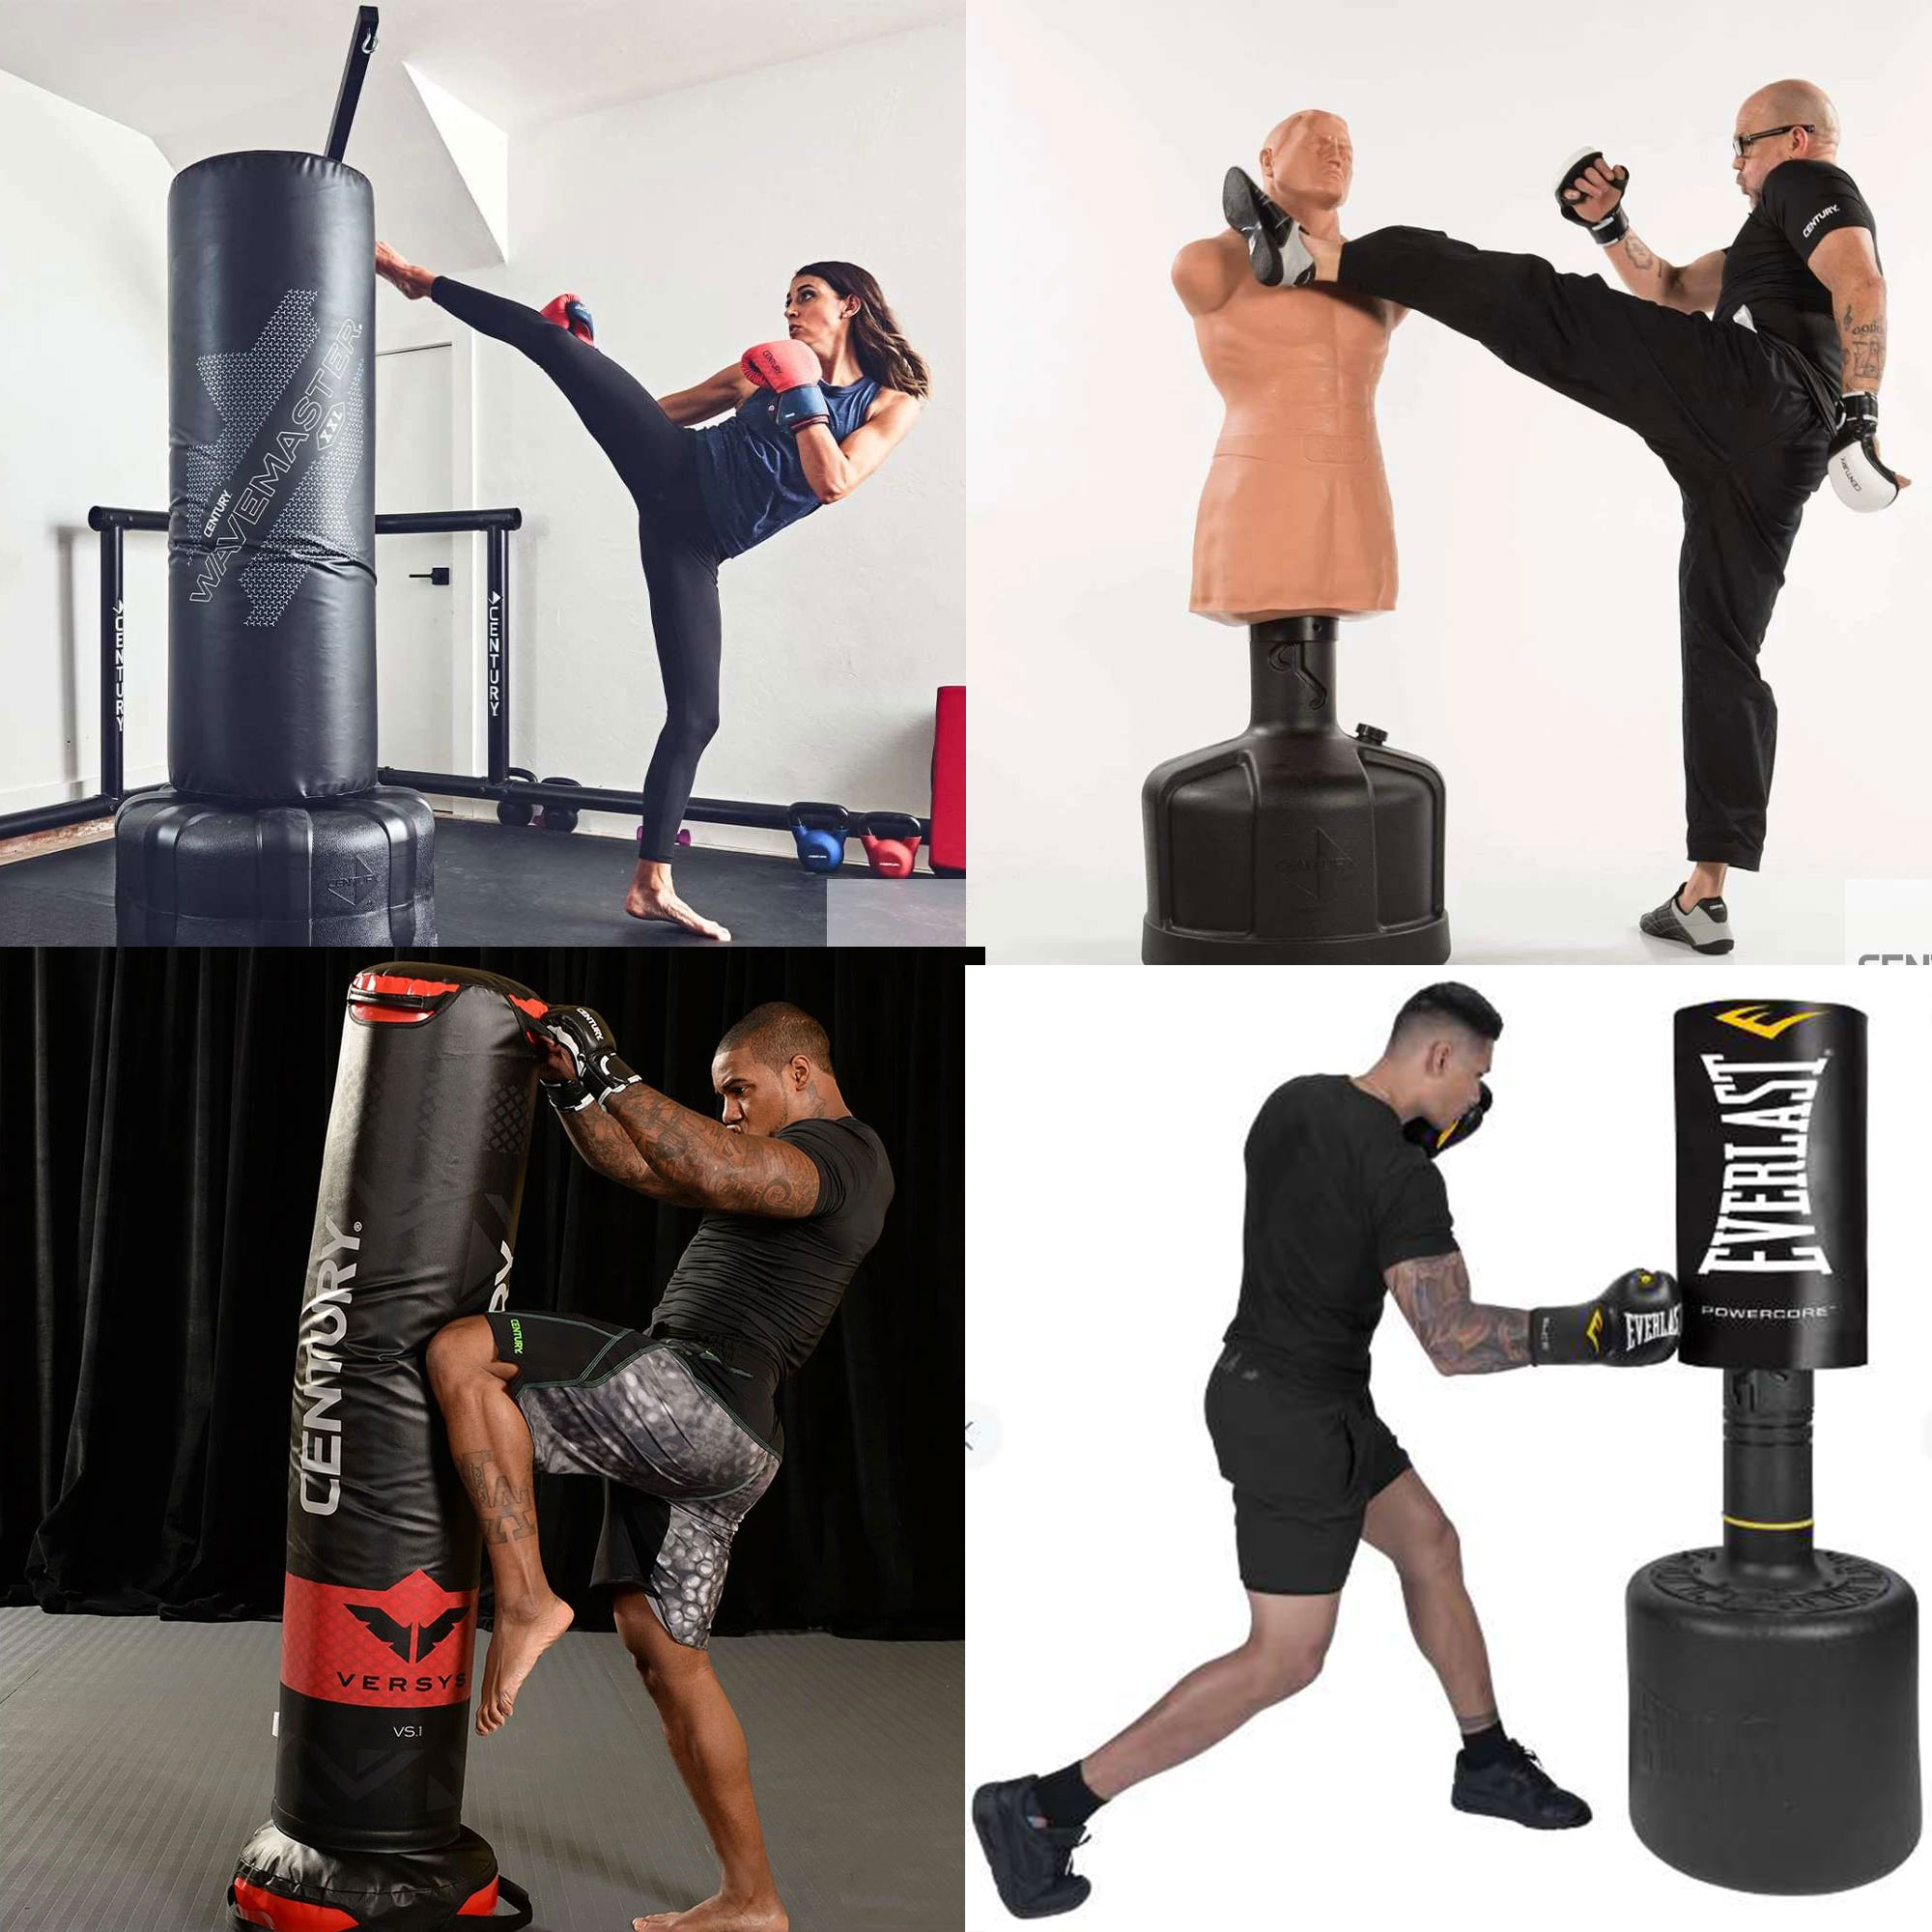 Free Standing Punching Bags For At Home | Top 5 on Amazon - YouTube